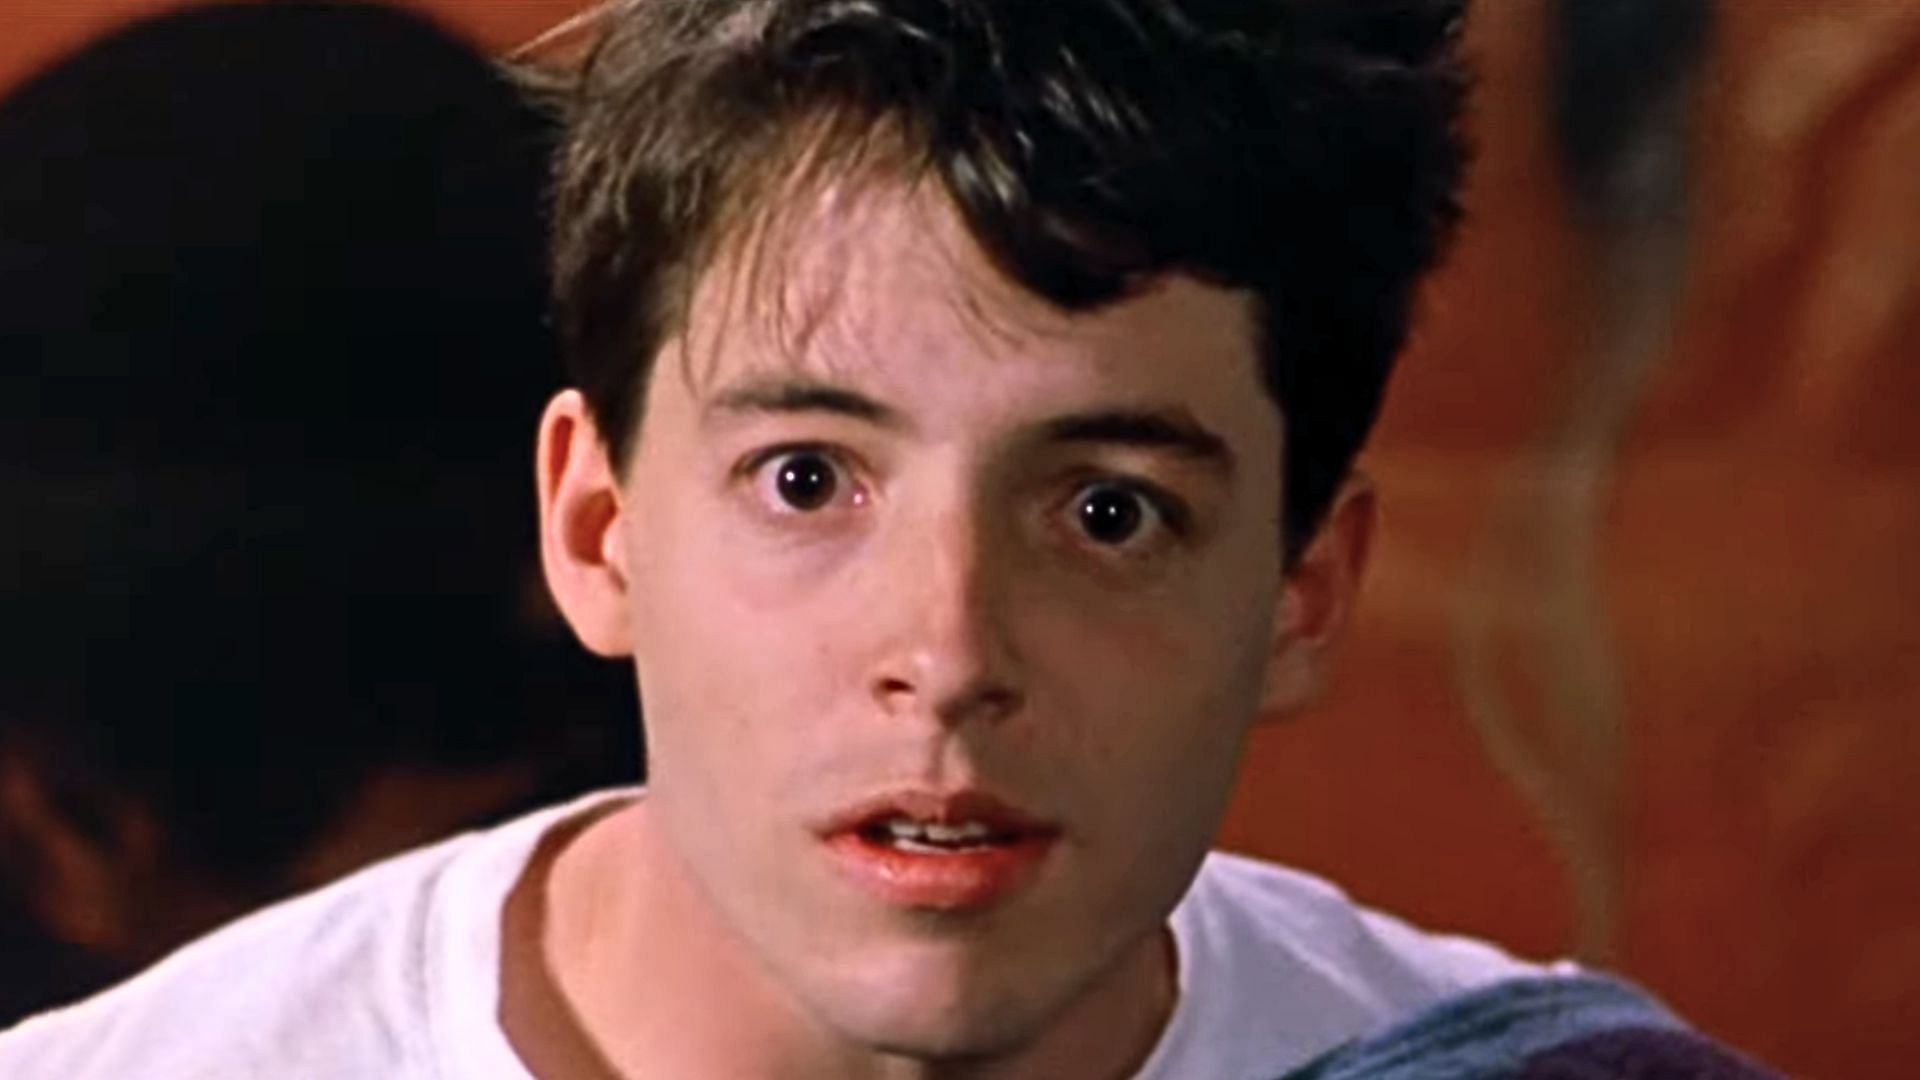 Ferris Bueller is portrayed by Matthew Broderick (Image via YouTube/Paramount Movies)